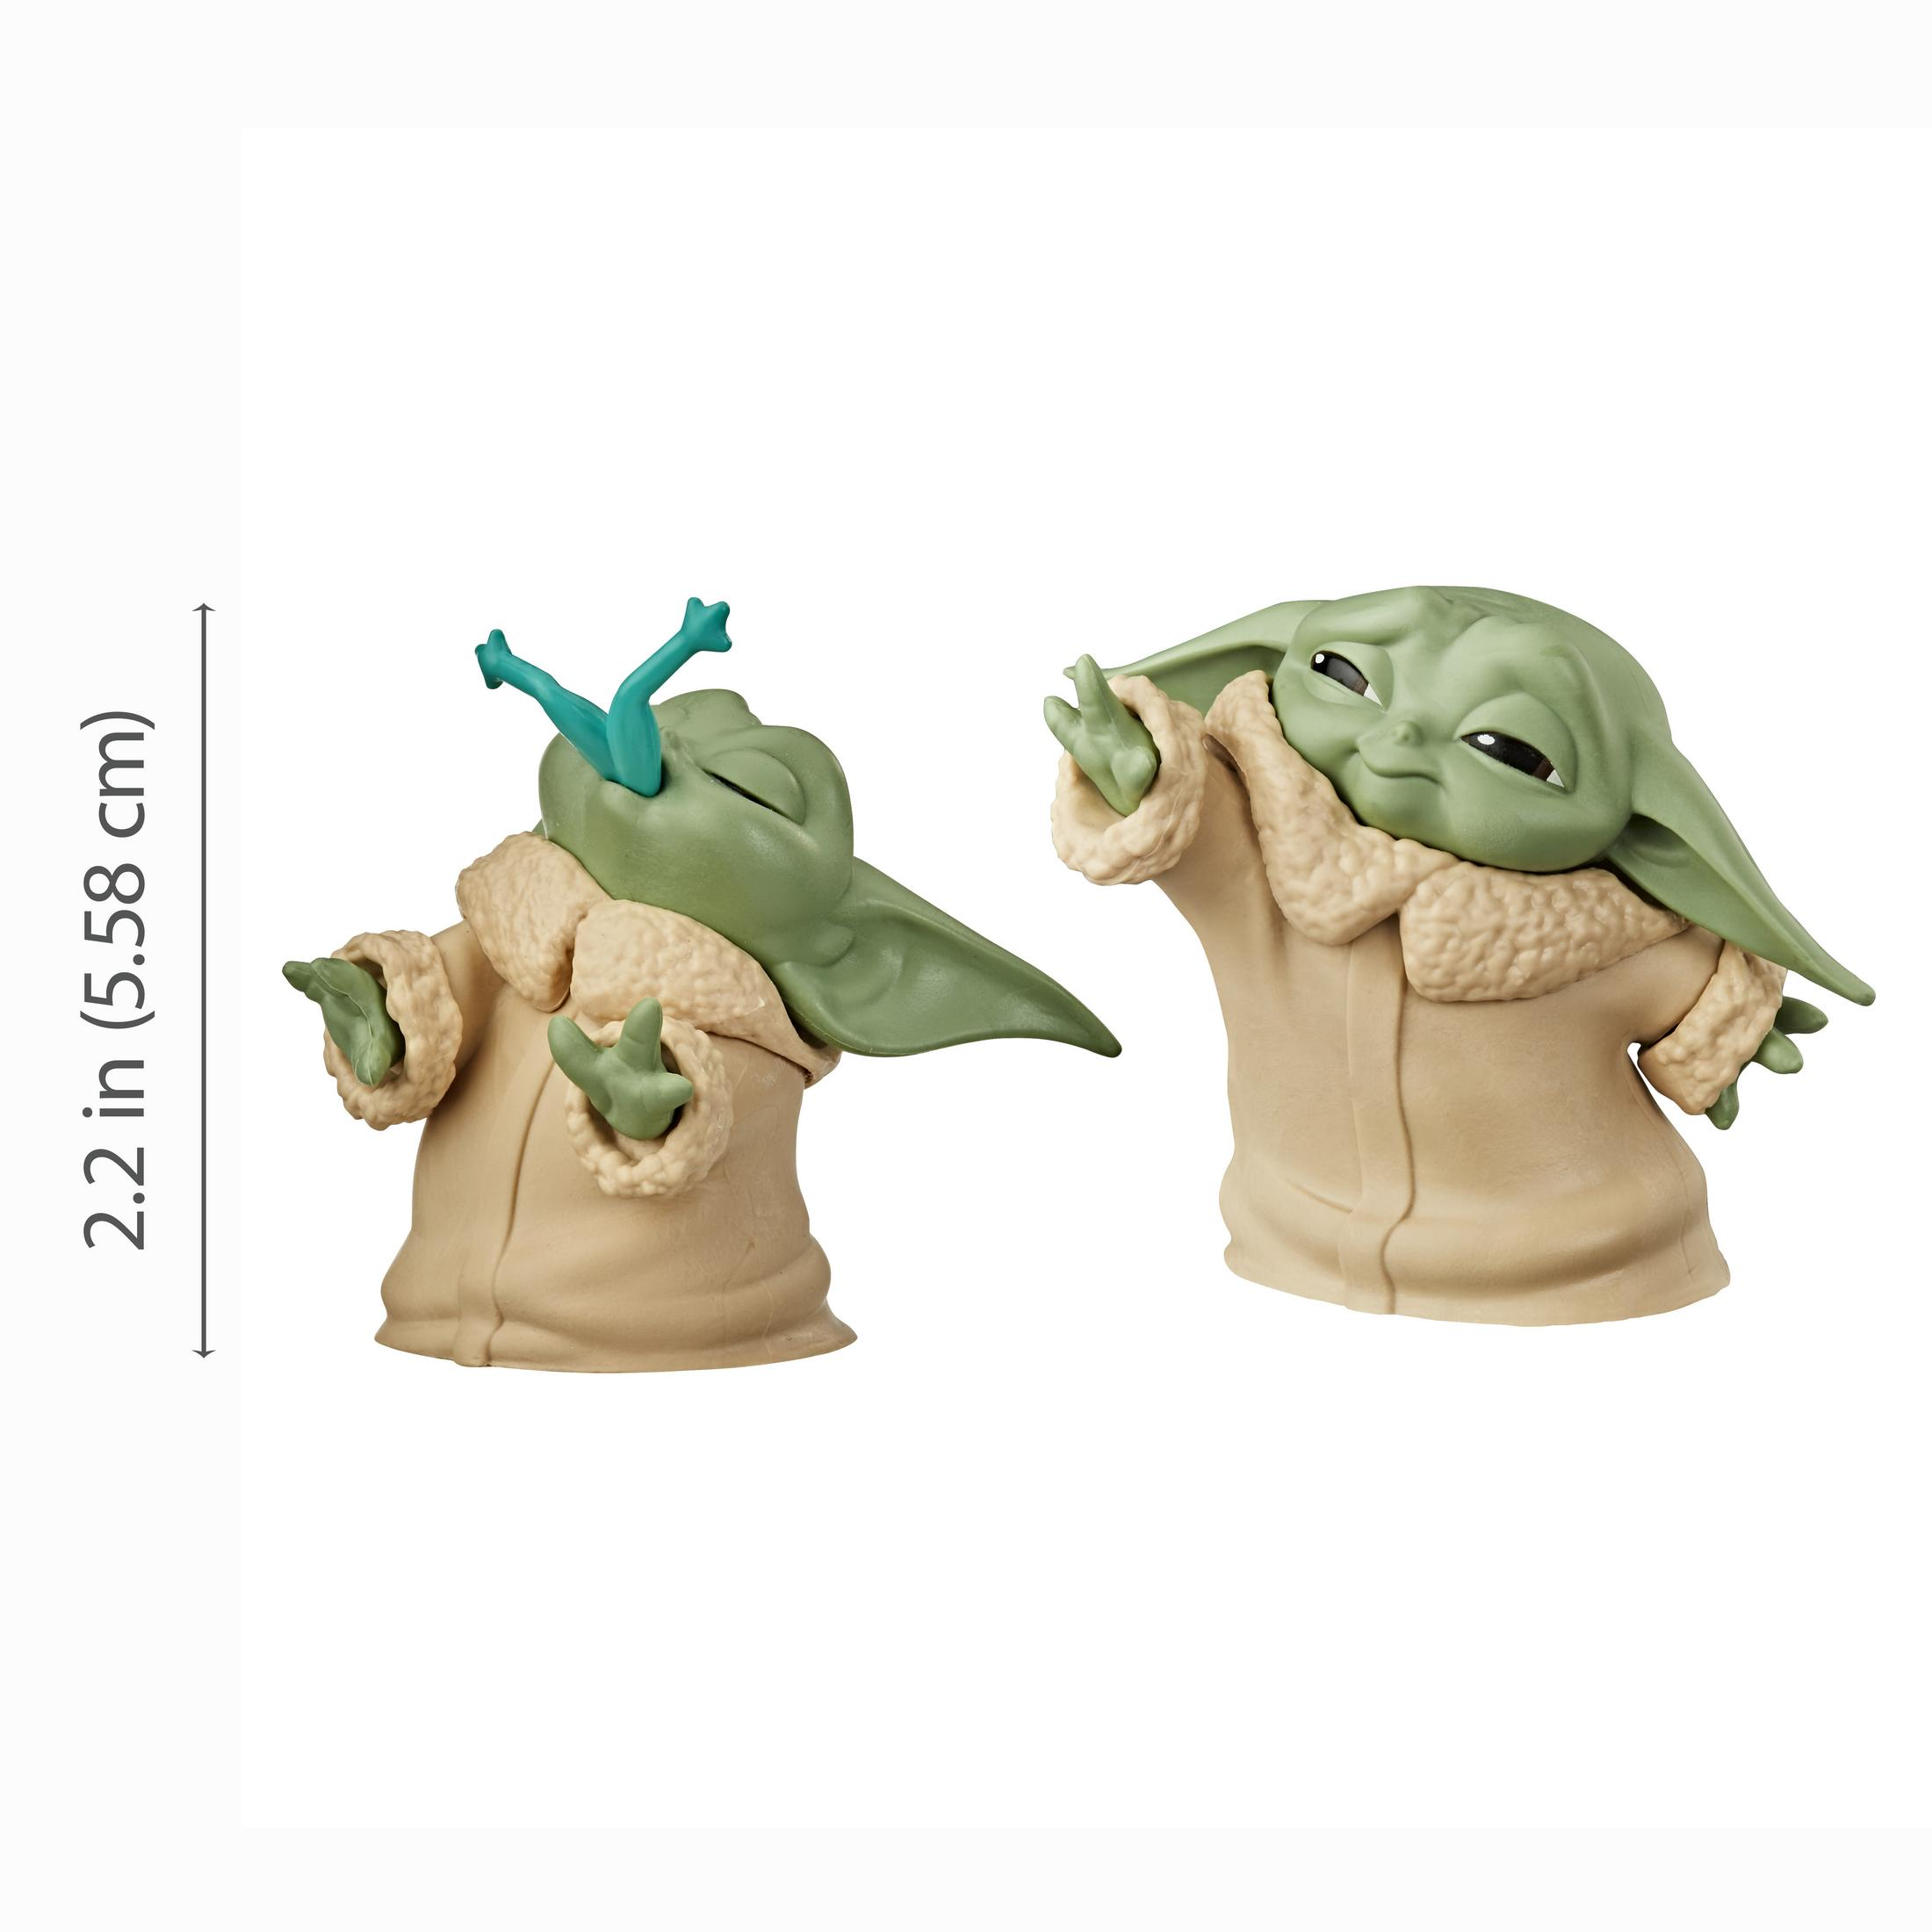 Yoda, Actionfigur (Froggy The Snack) Wars HASBRO Child Baby Mandalorian Figur: Snack The Froschiger Star